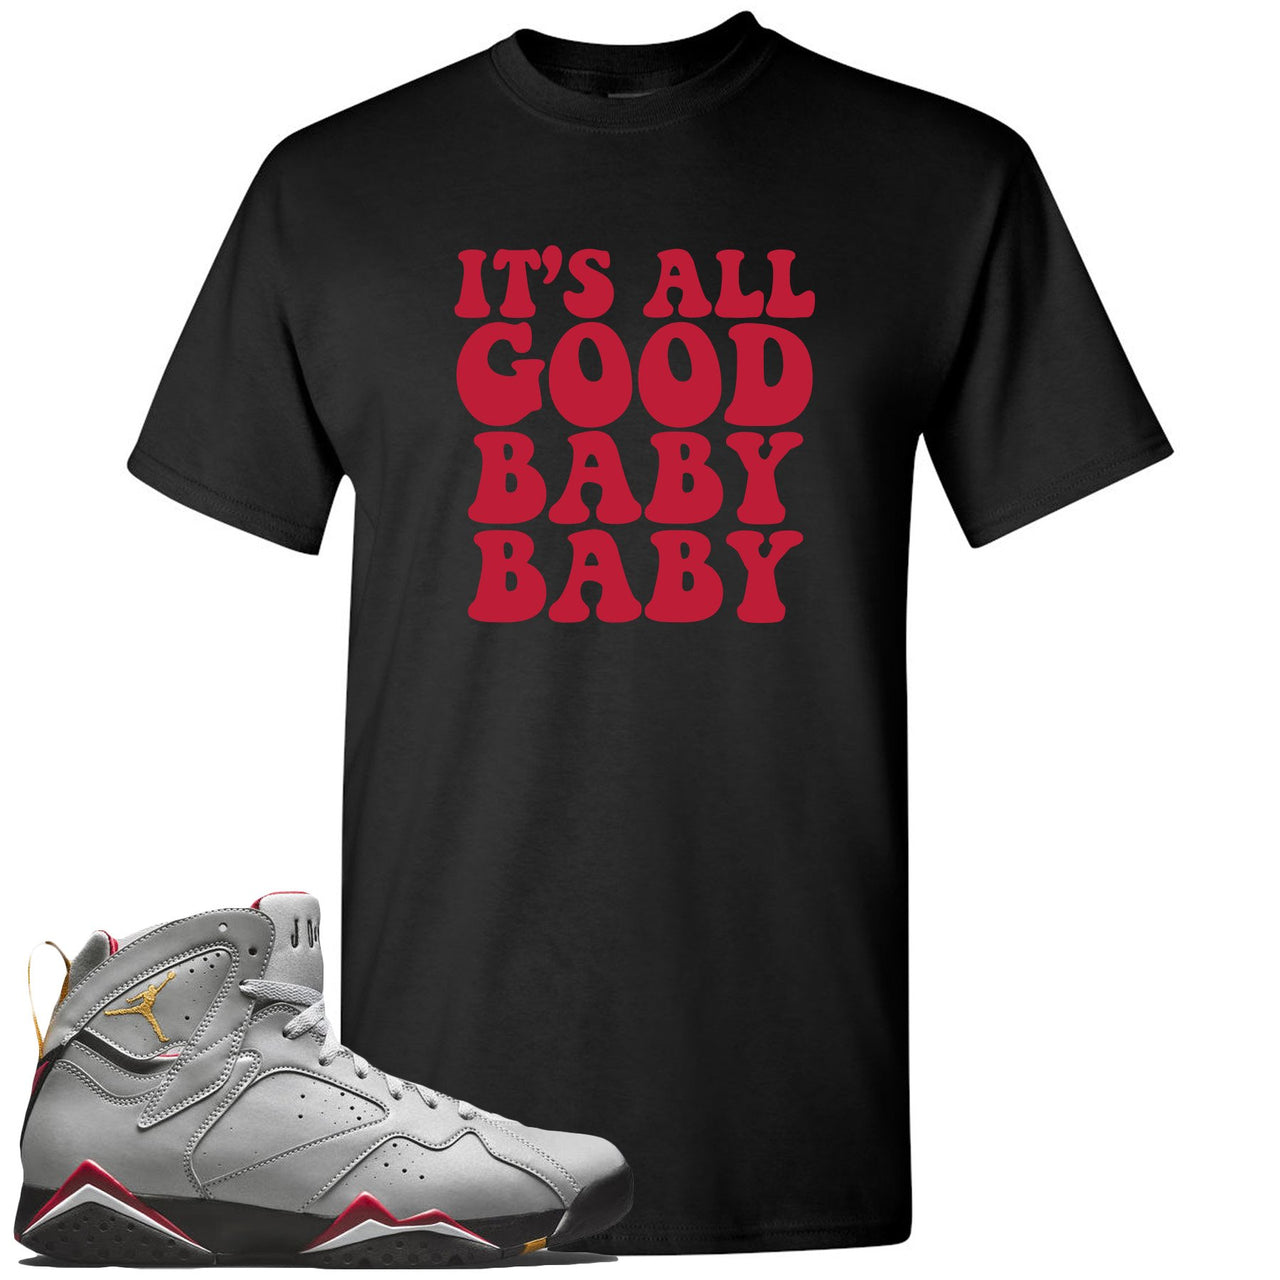 Reflections of a Champion 7s T Shirt | It's All Good Baby Baby, Black